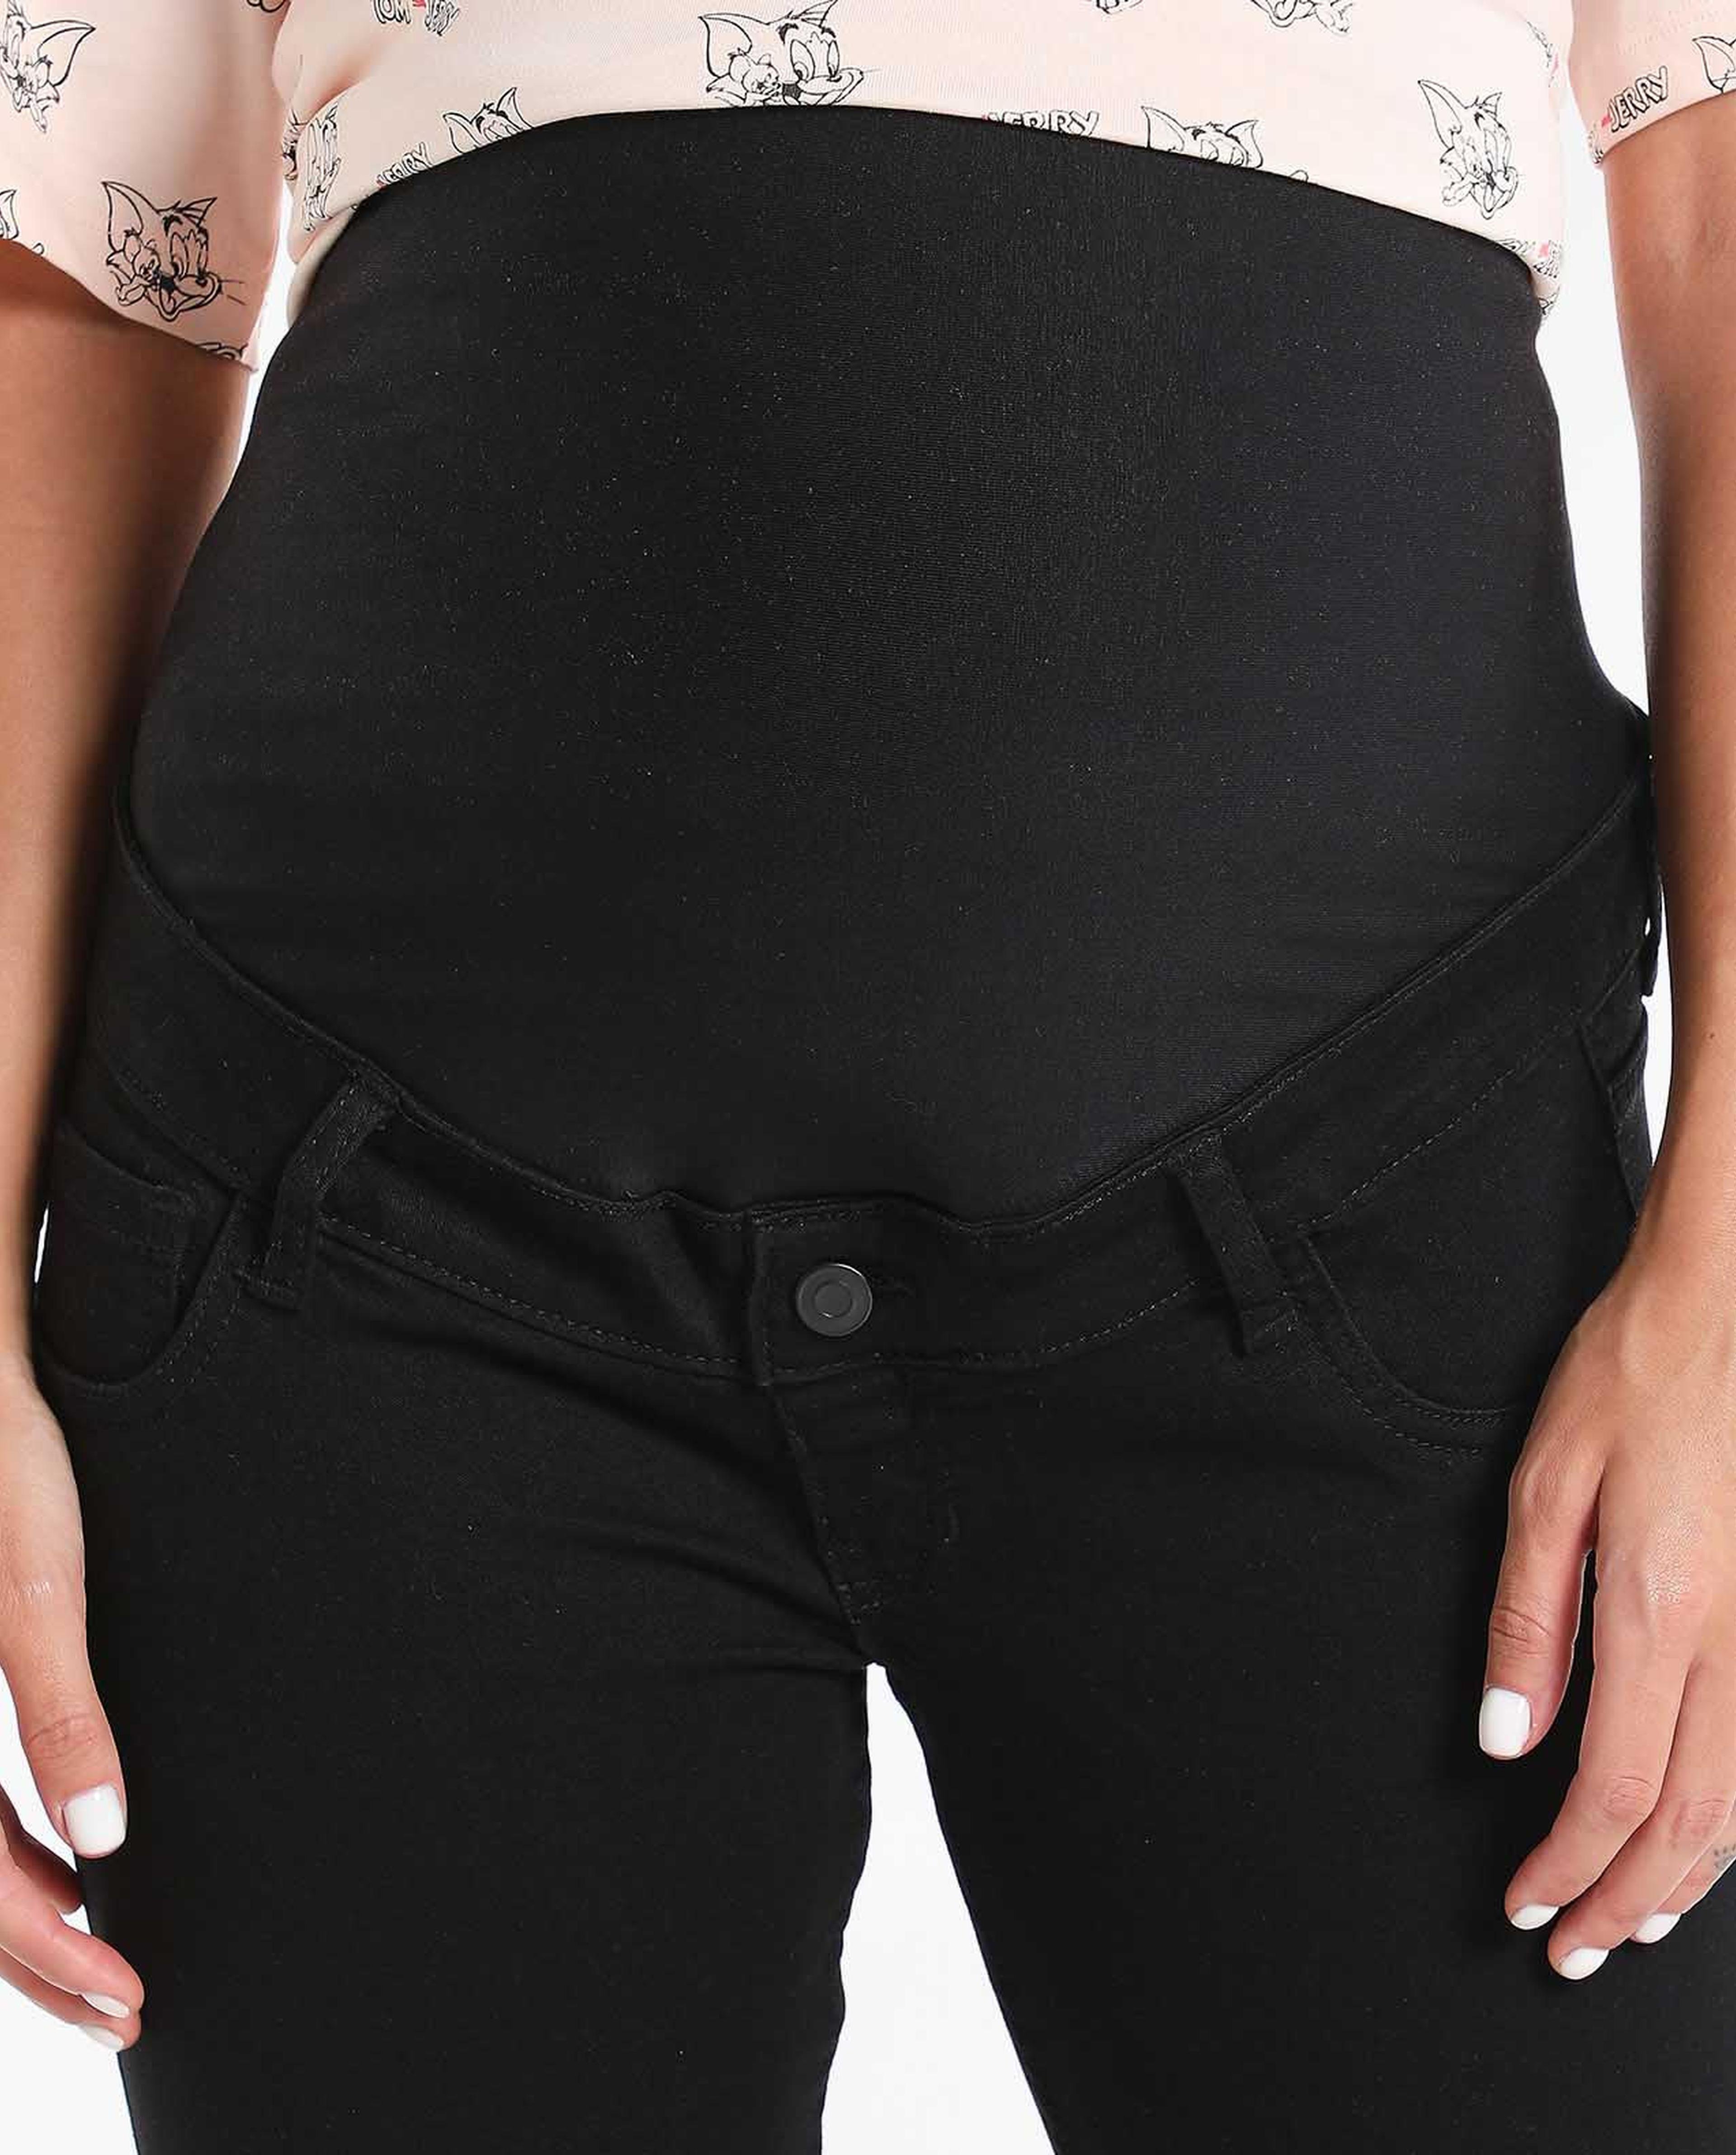 Low Waist Maternity Denim Jeans with Button Closure